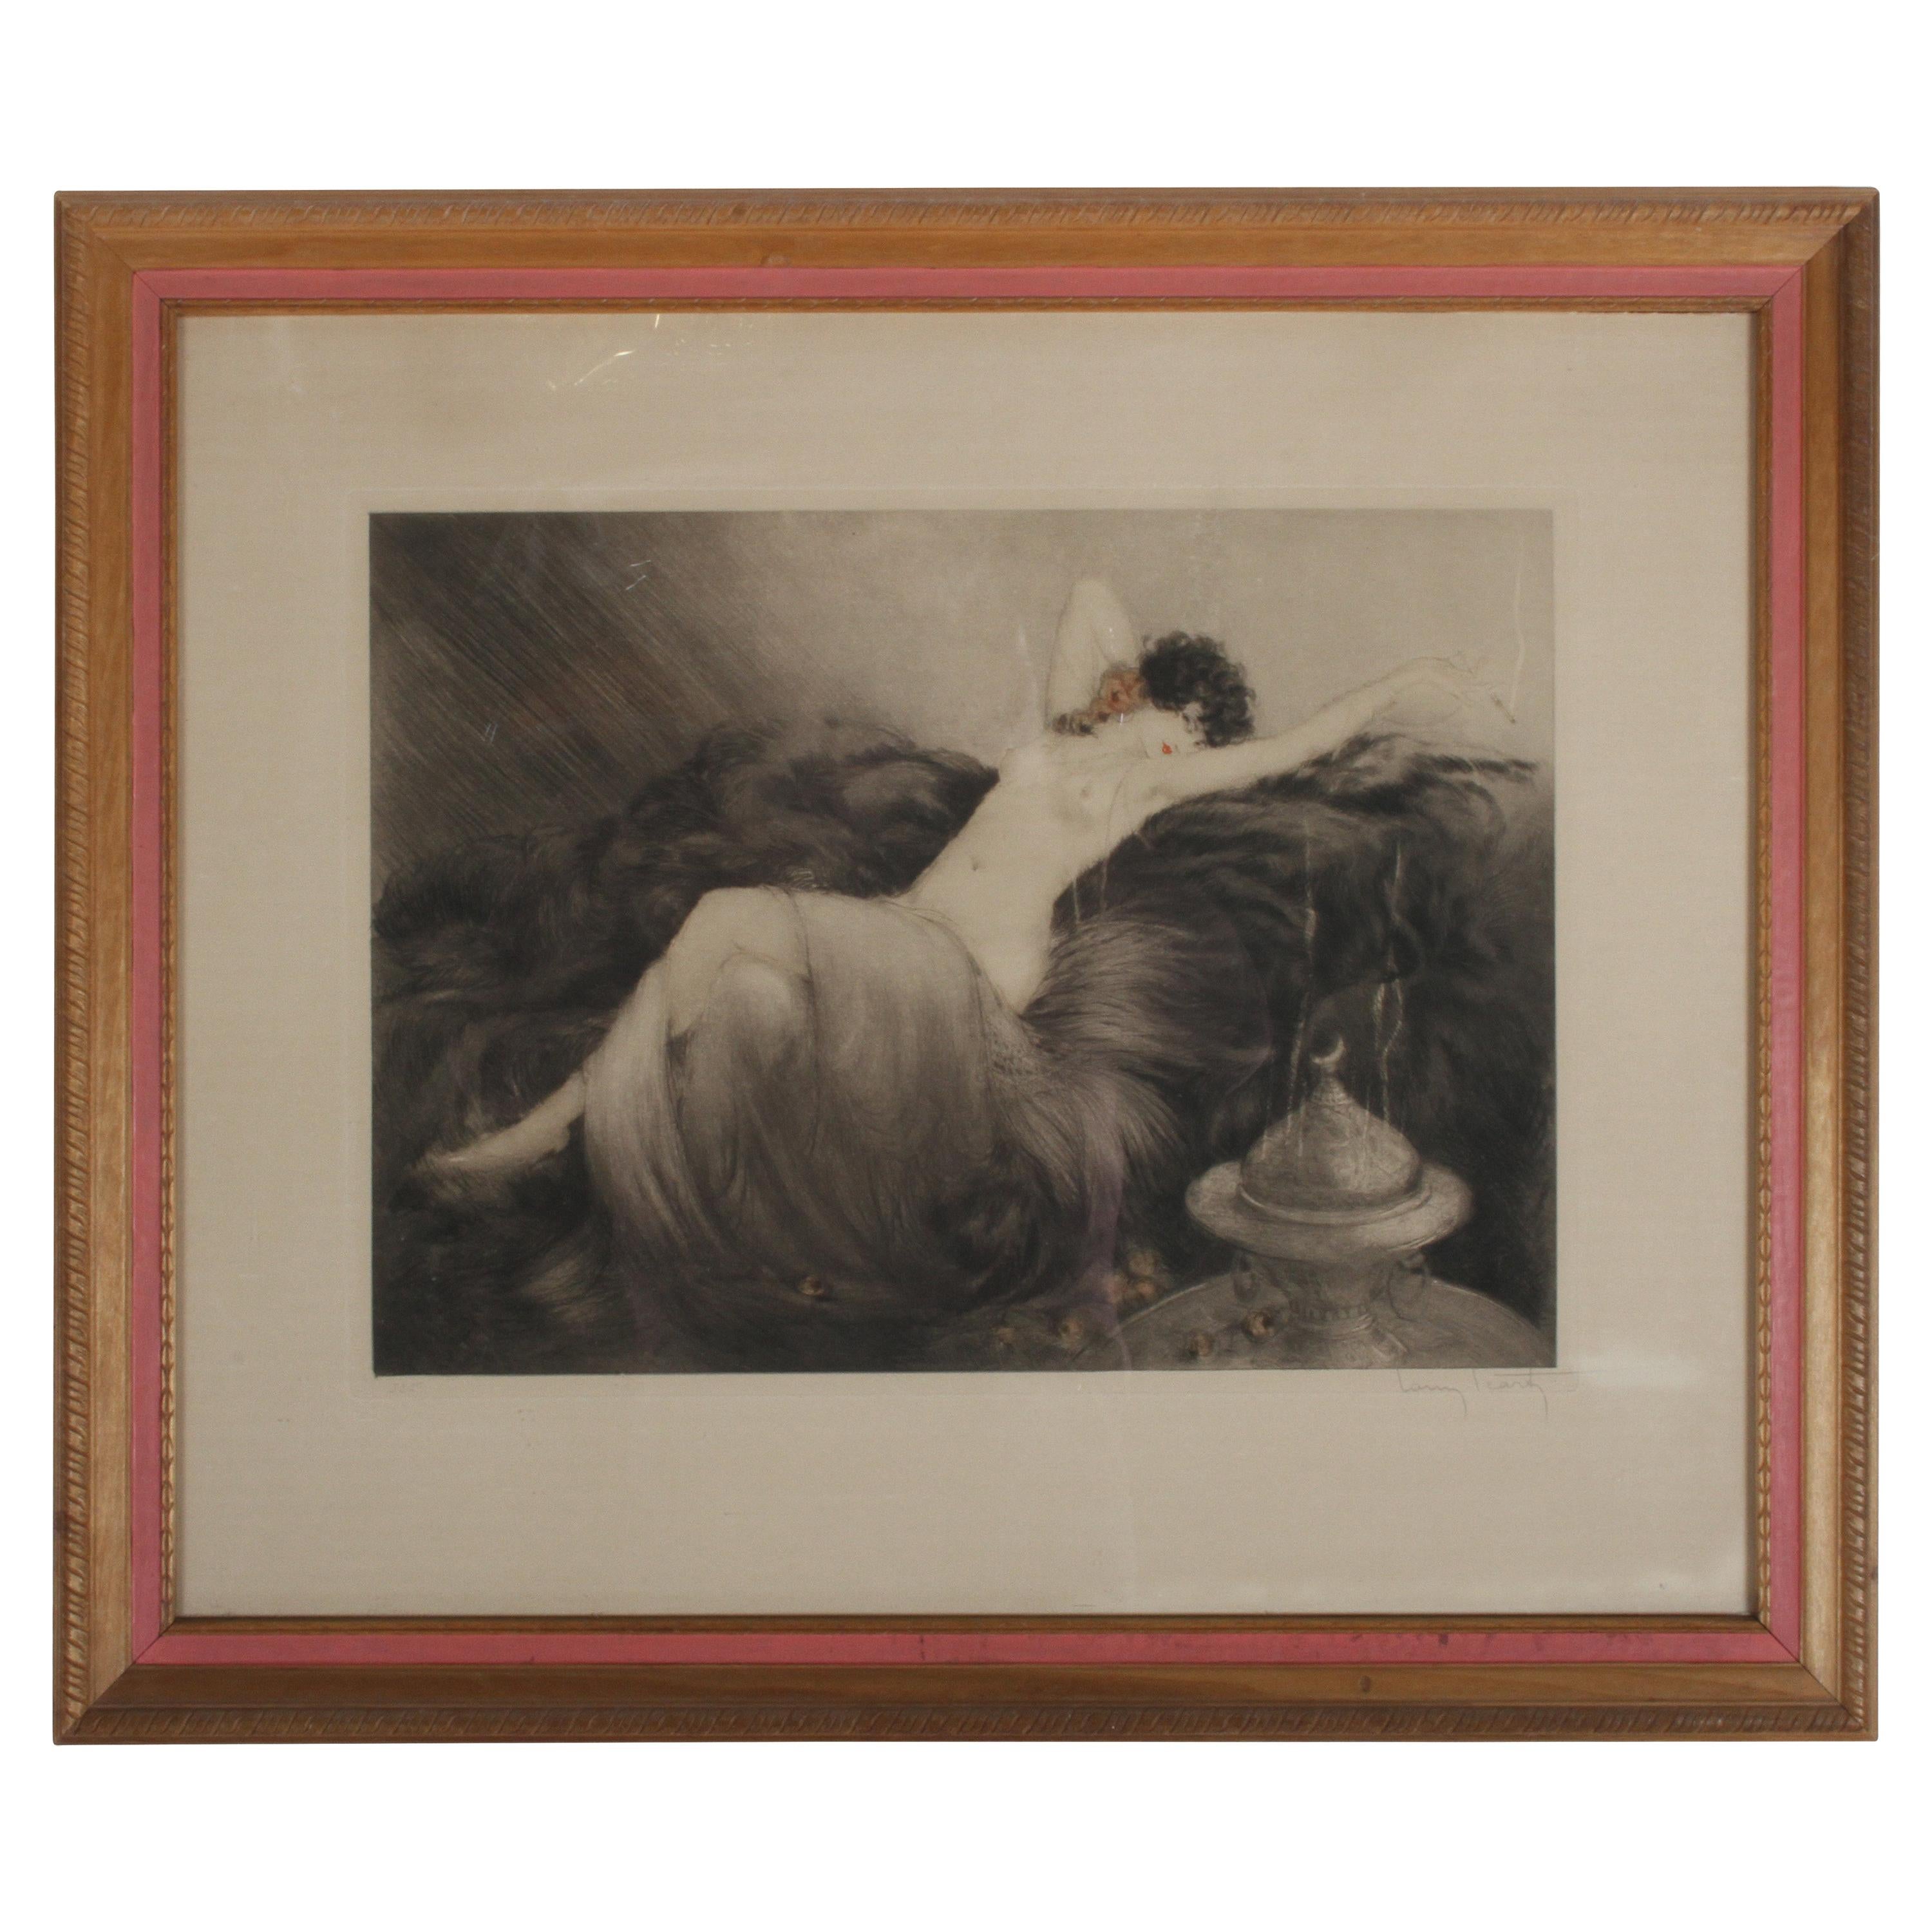 Original Signed Louis Icart Etching Titled "Idleness" or Laziness" Bear Rug 1925